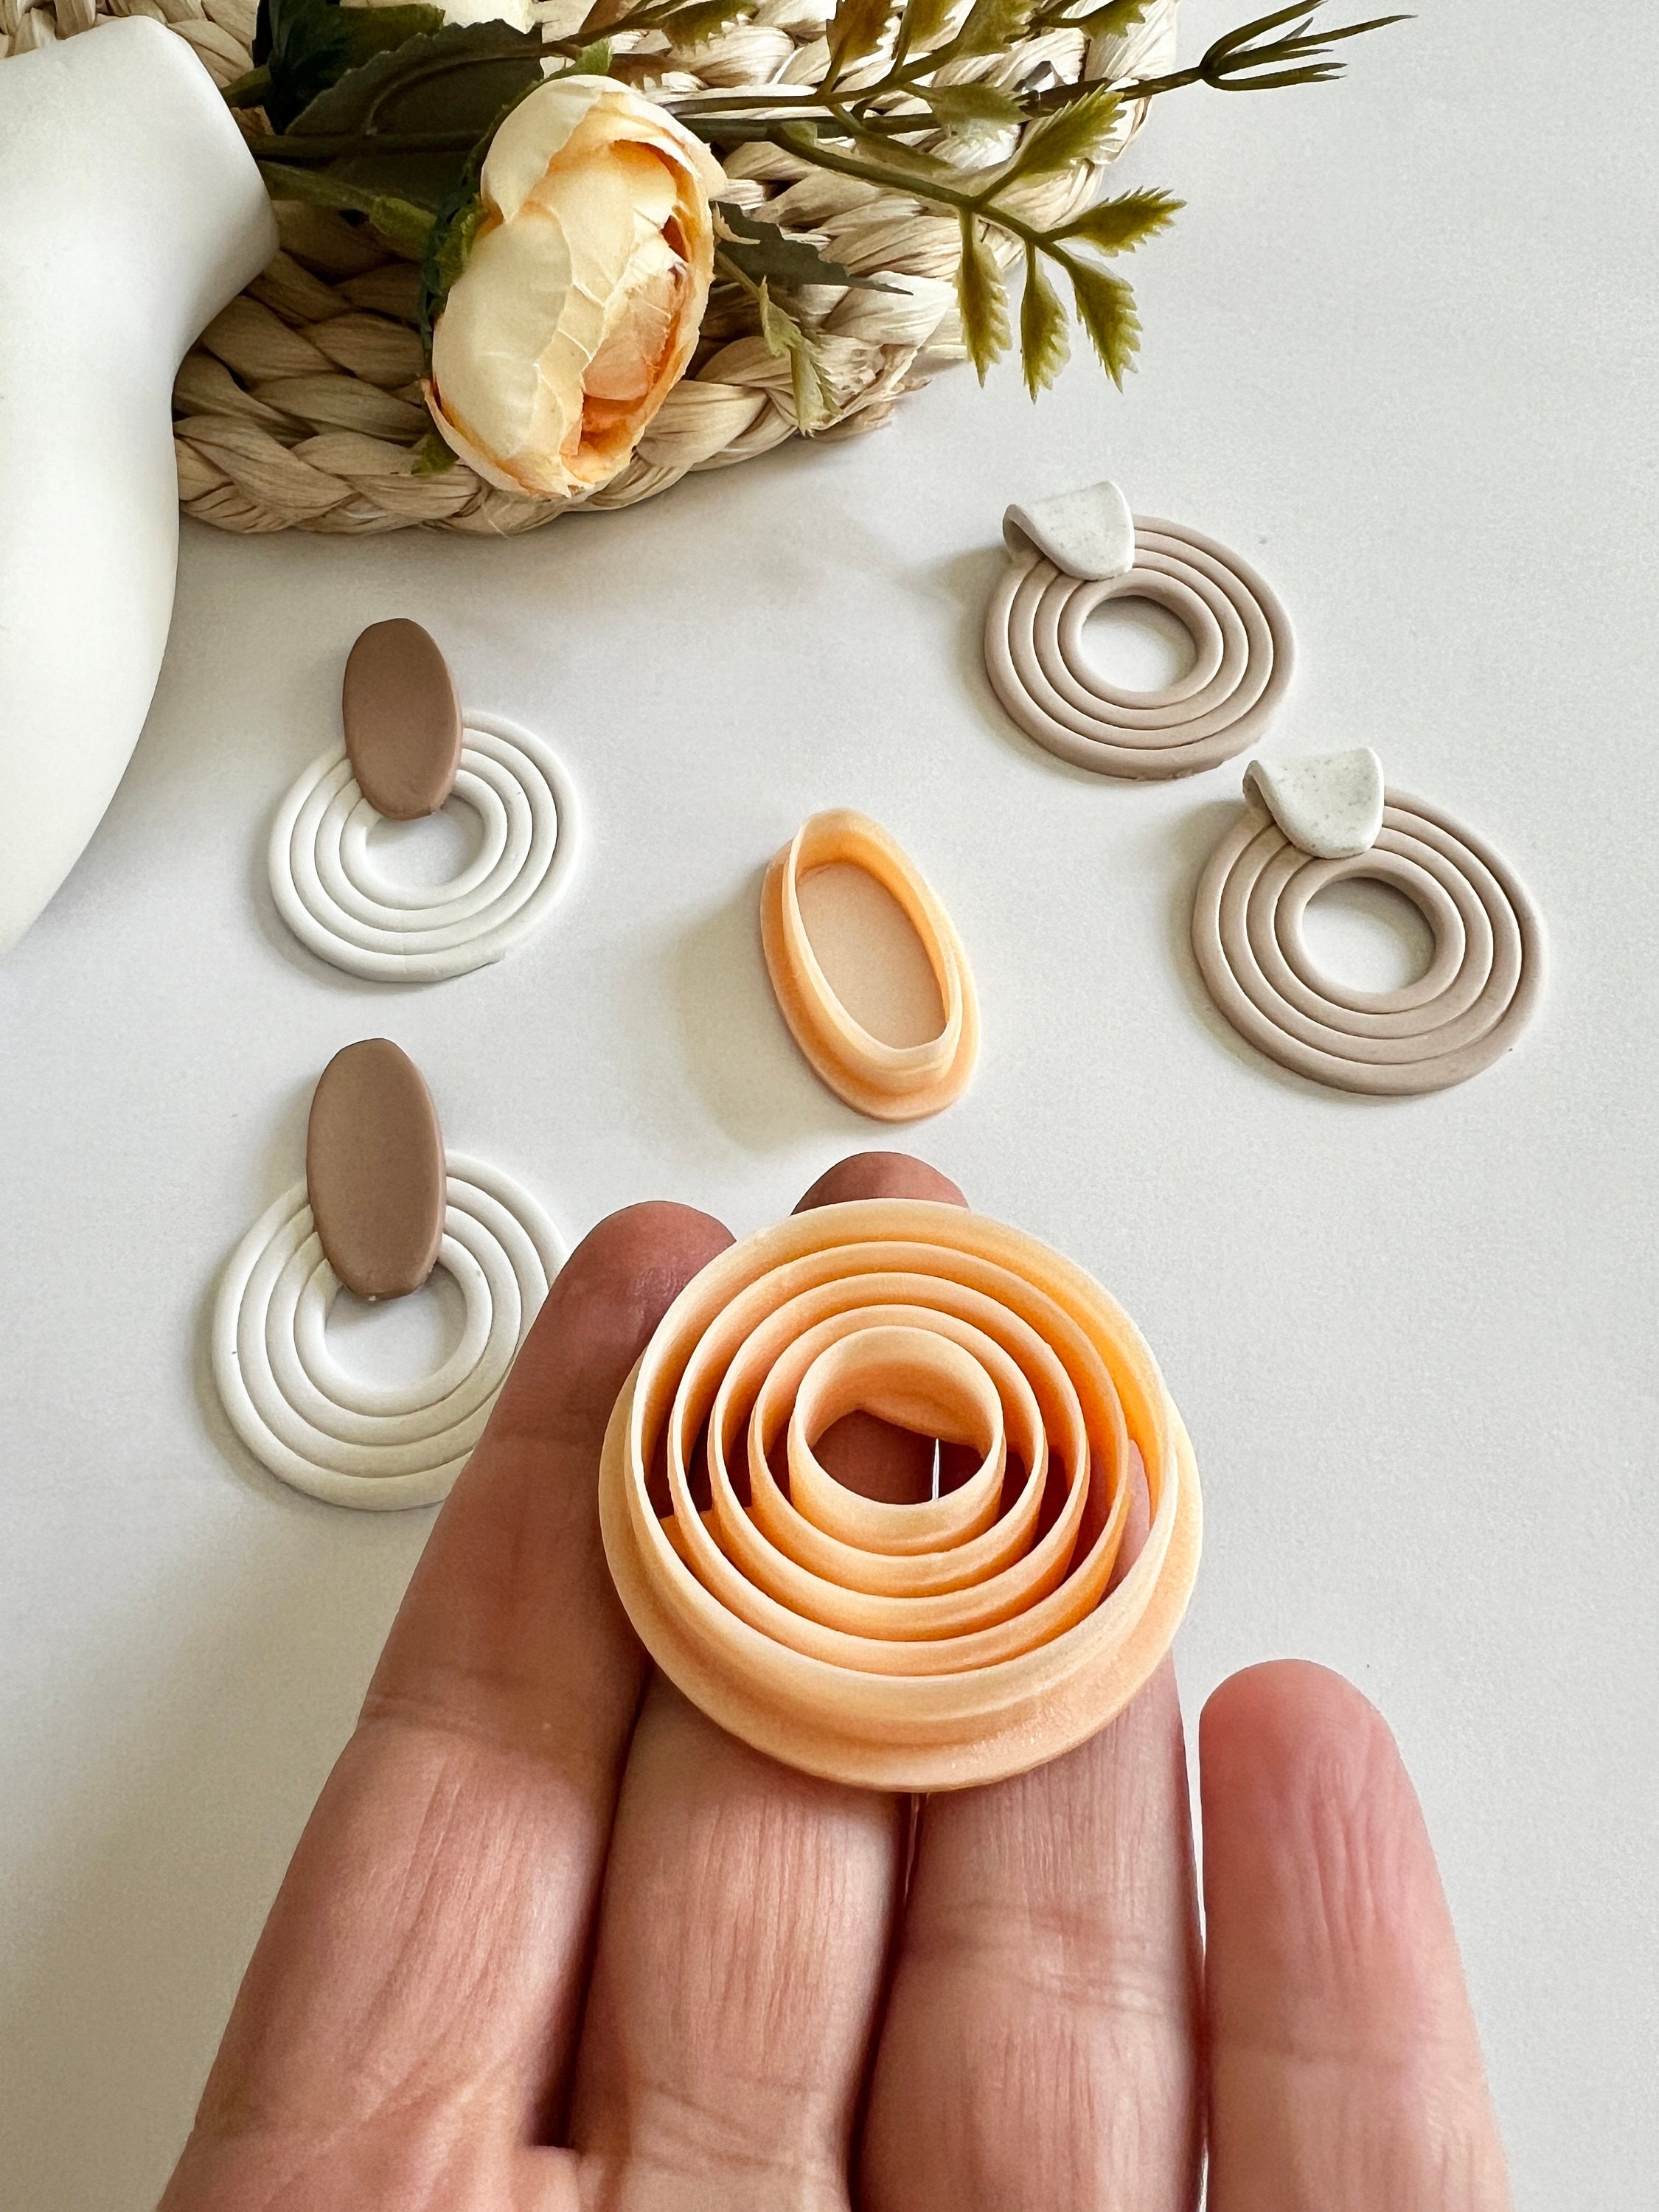 U Shape Clay Cutters Earring Jewelry Making Polymer Clay Tools 3D Printed  Clay Pottery Supplies DIY Earrings U Shape Pendant 